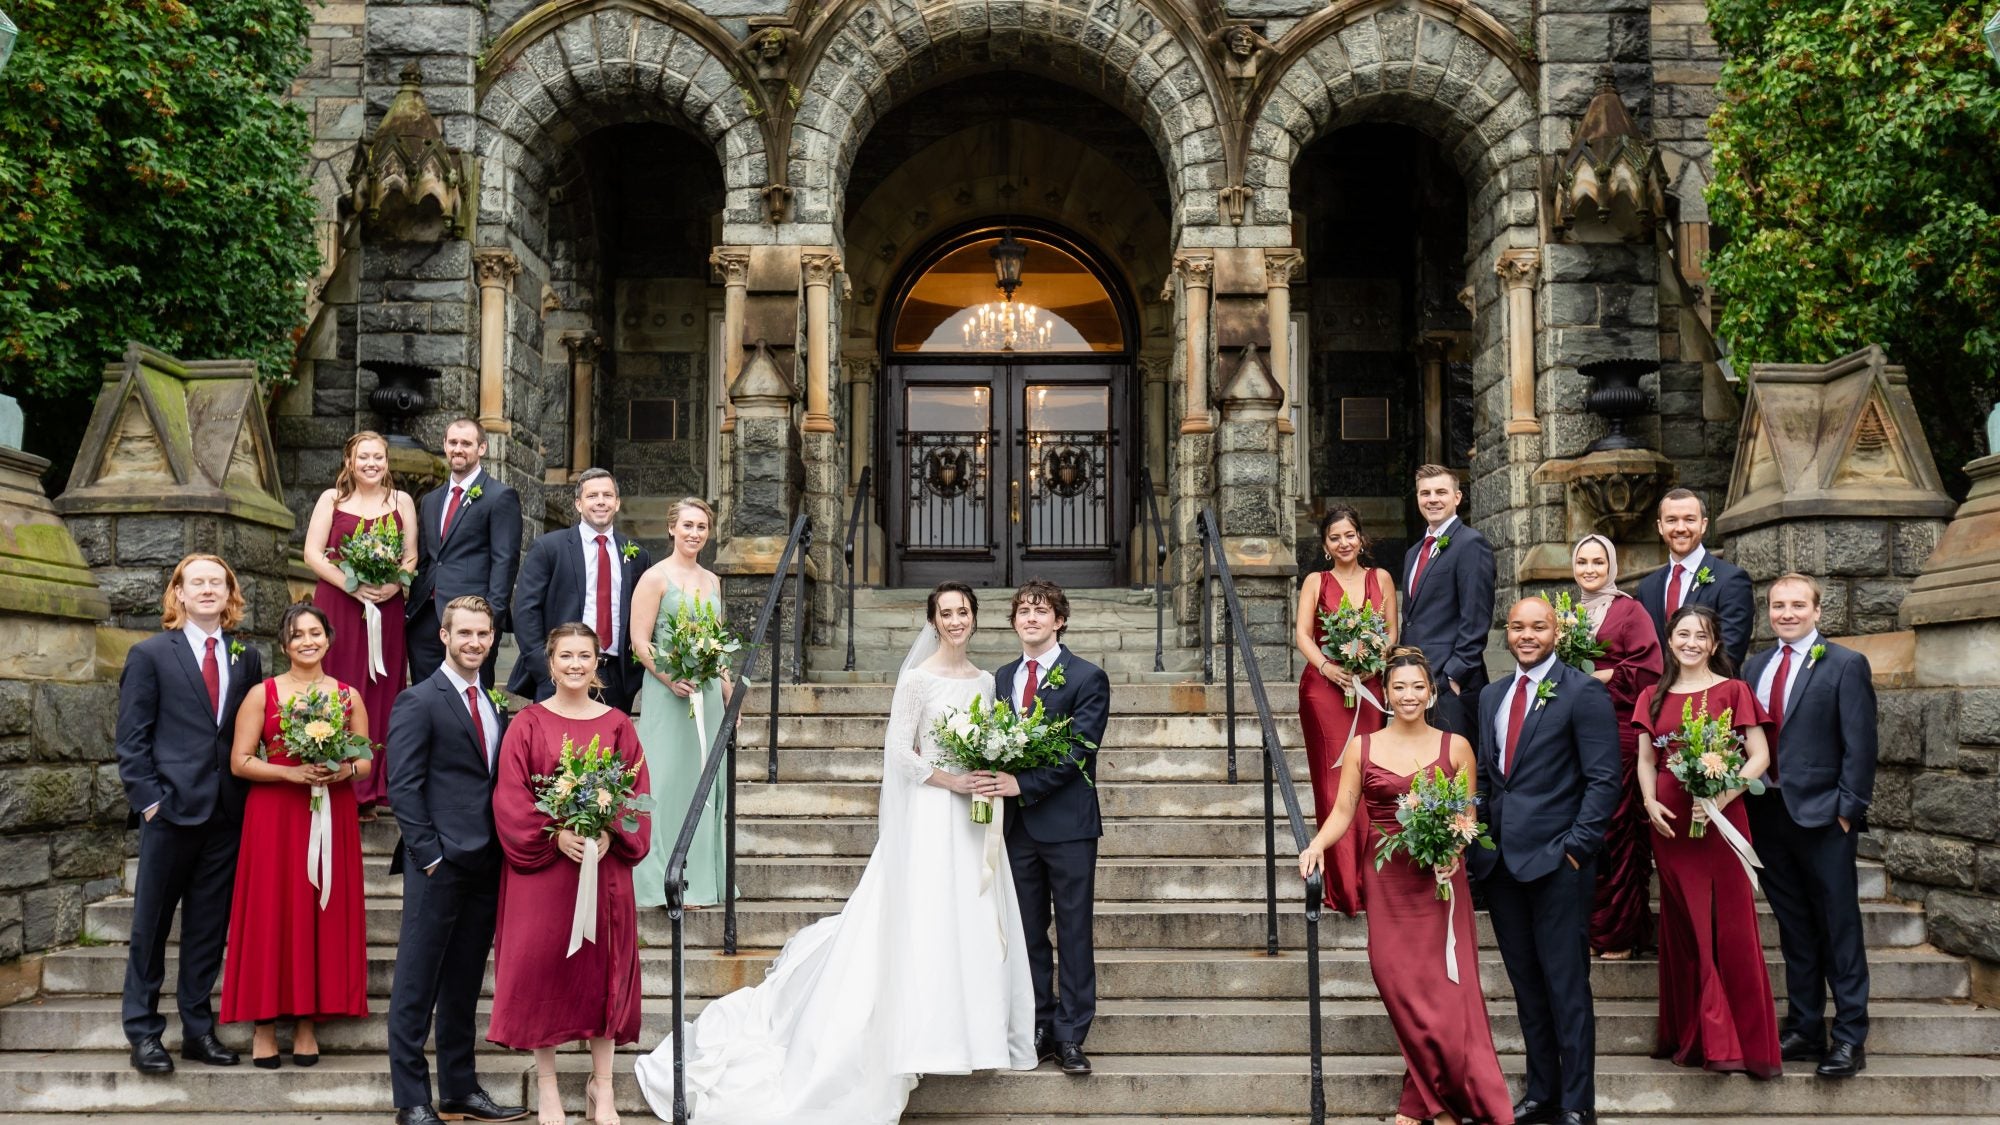 Mark and Meghan pictured in front of Healy Hall with their wedding party.